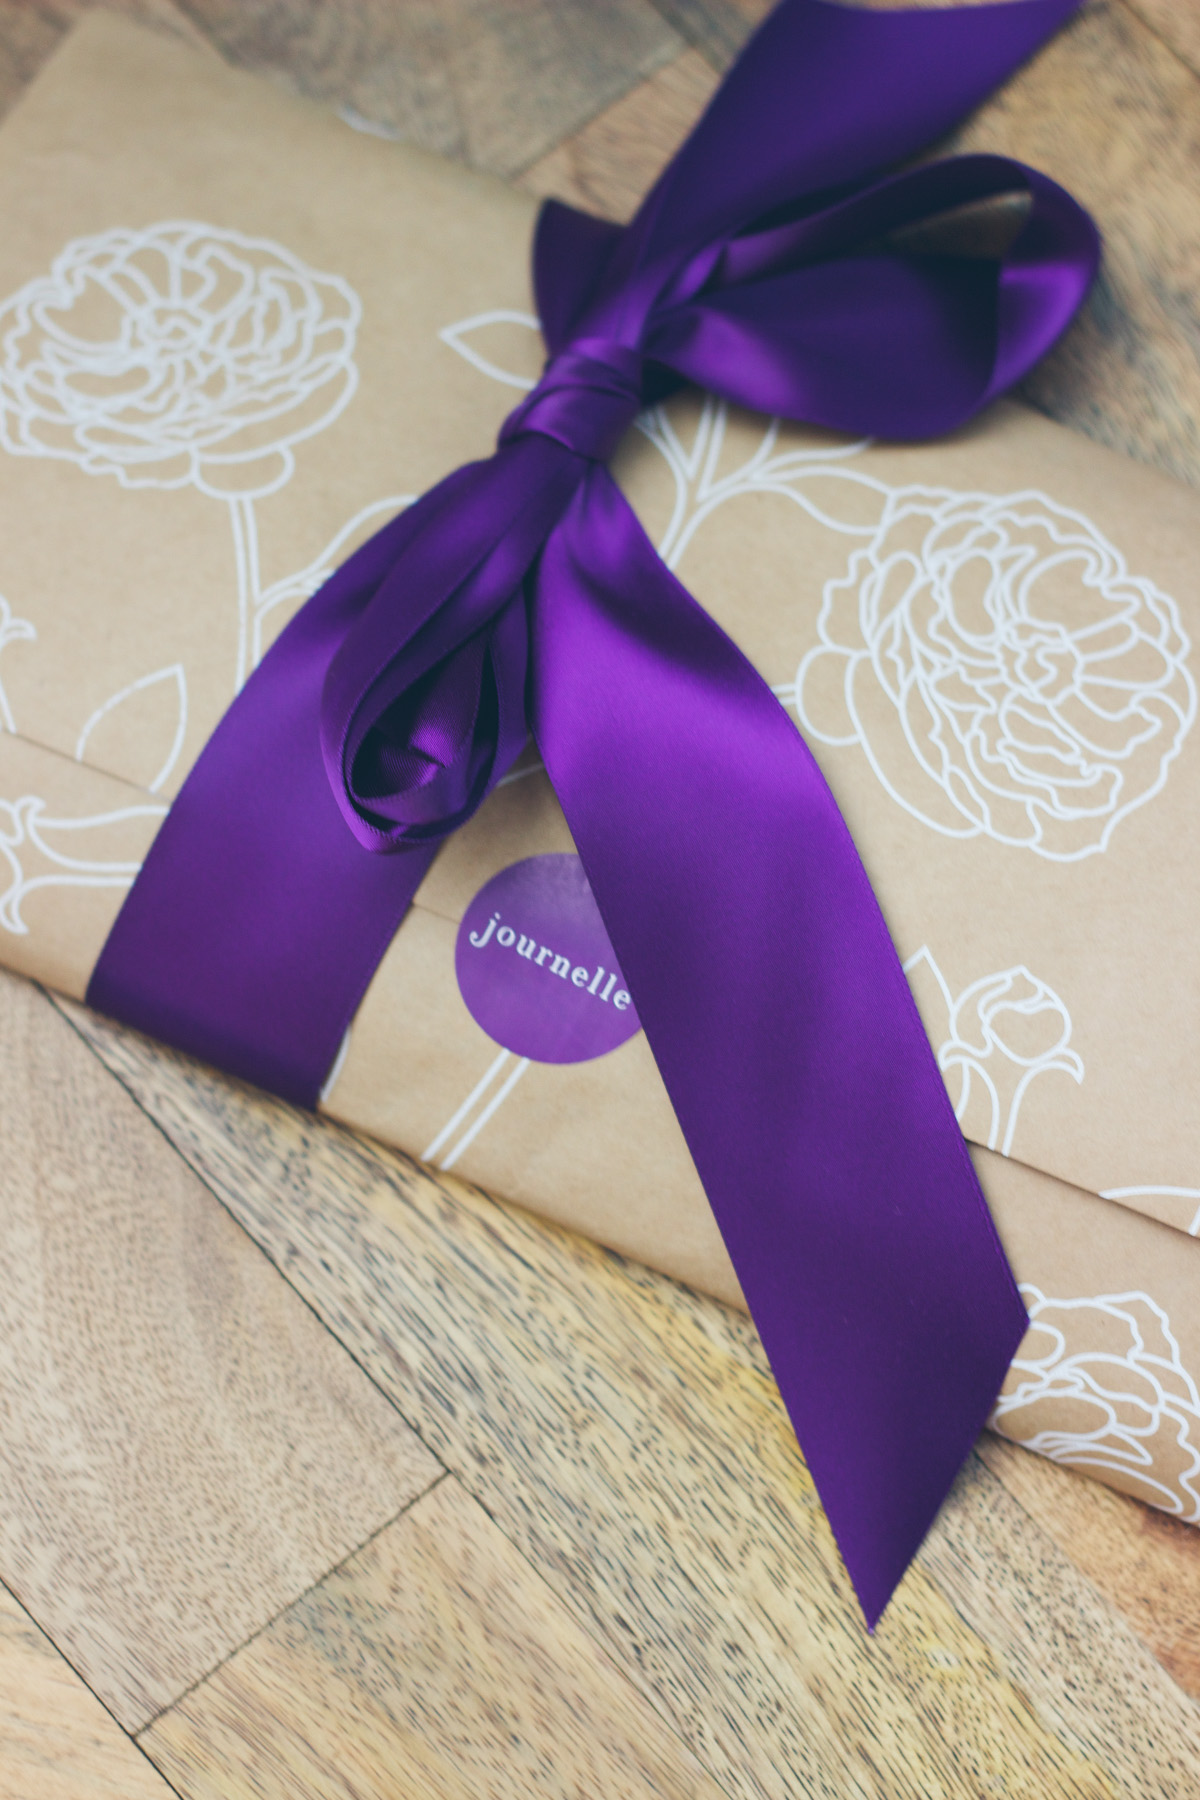 journelle wrapping